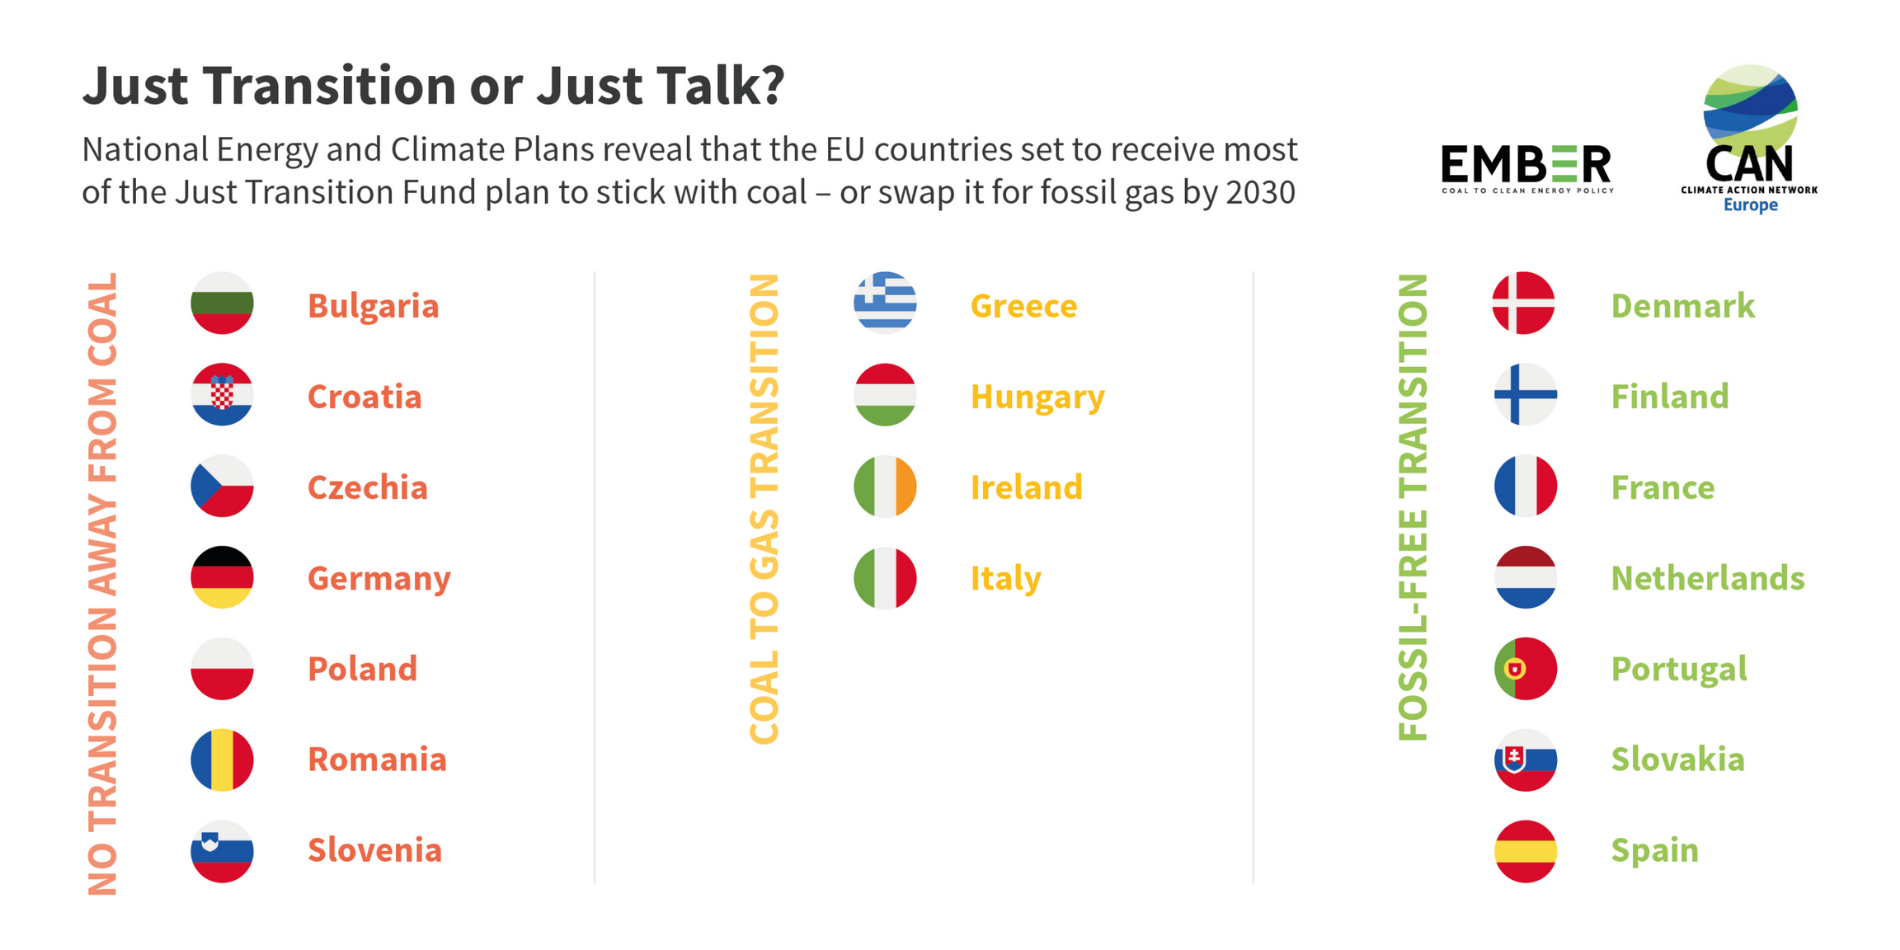 4 countries will move away from coal but swap it for gas